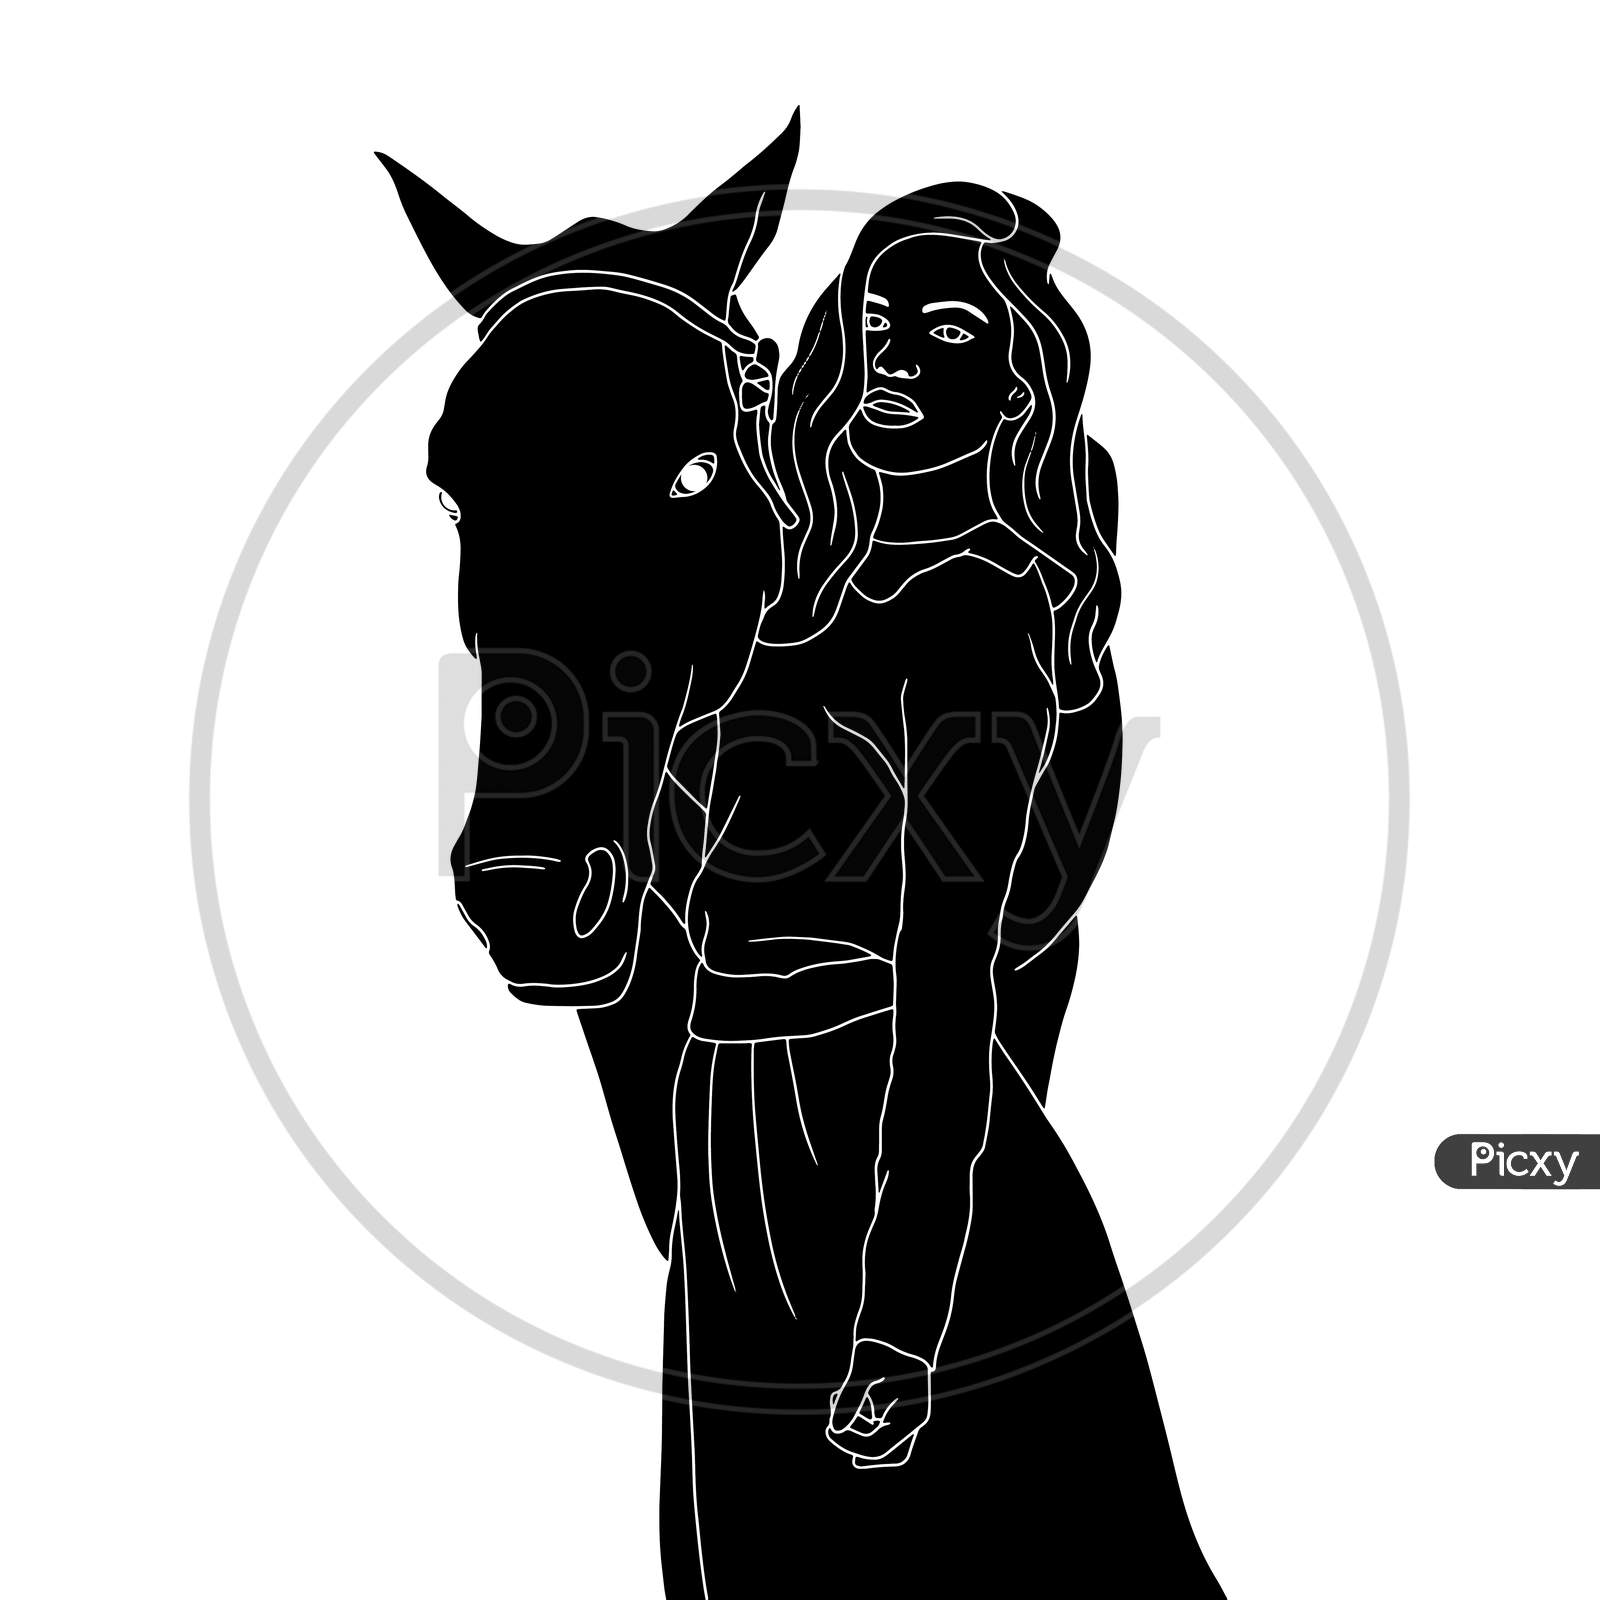 How to Draw Animals: Horses, Their Anatomy and Poses | Envato Tuts+